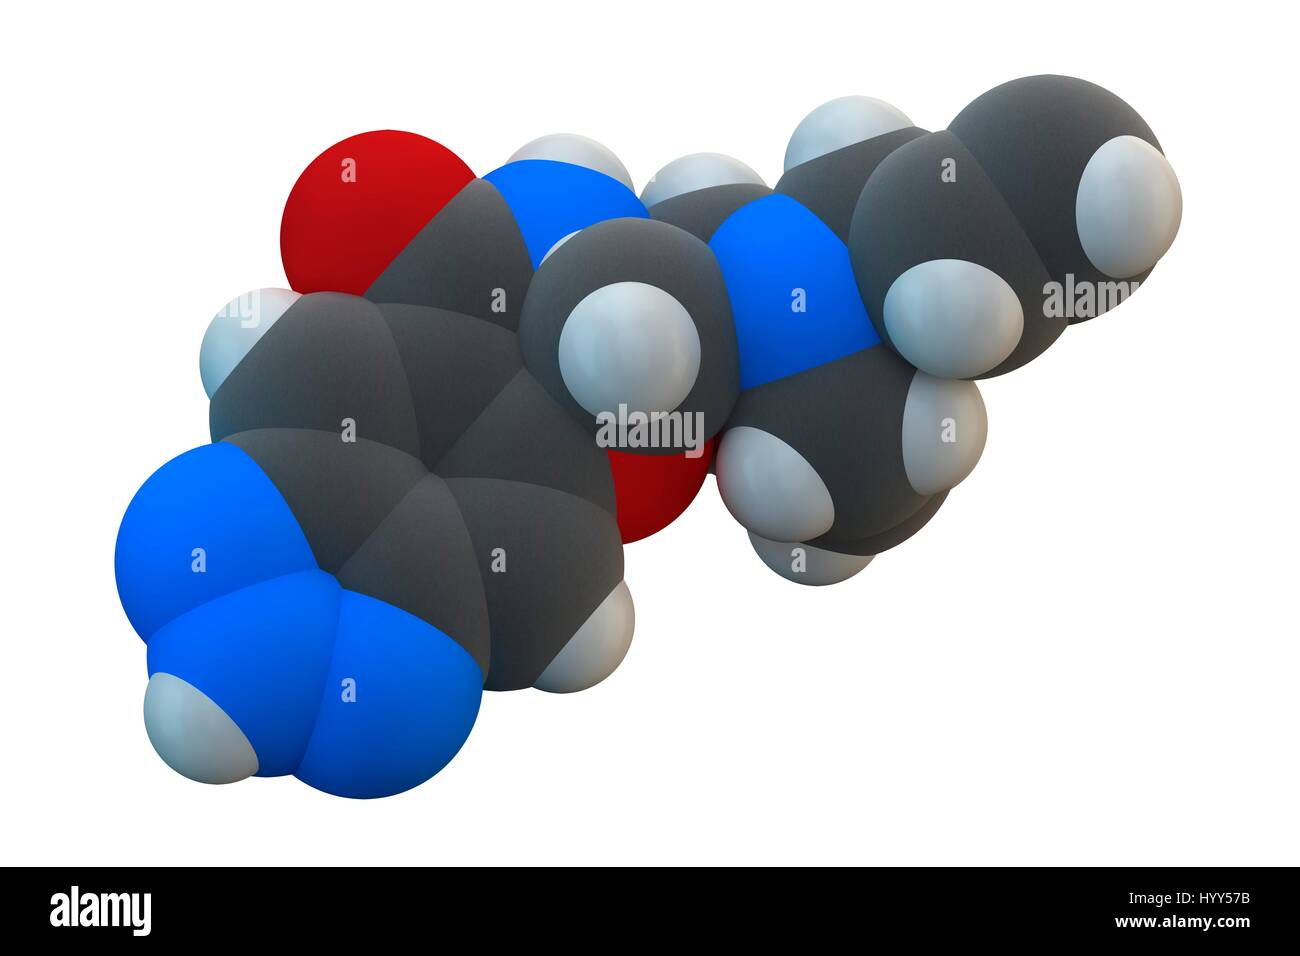 Alizapride antiemetic drug molecule. Used in treatment of nausea and vomiting. Chemical formula is C16H21N5O2. Atoms are represented as spheres: carbon (grey), hydrogen (white), nitrogen (blue), oxygen (red). Illustration. Stock Photo